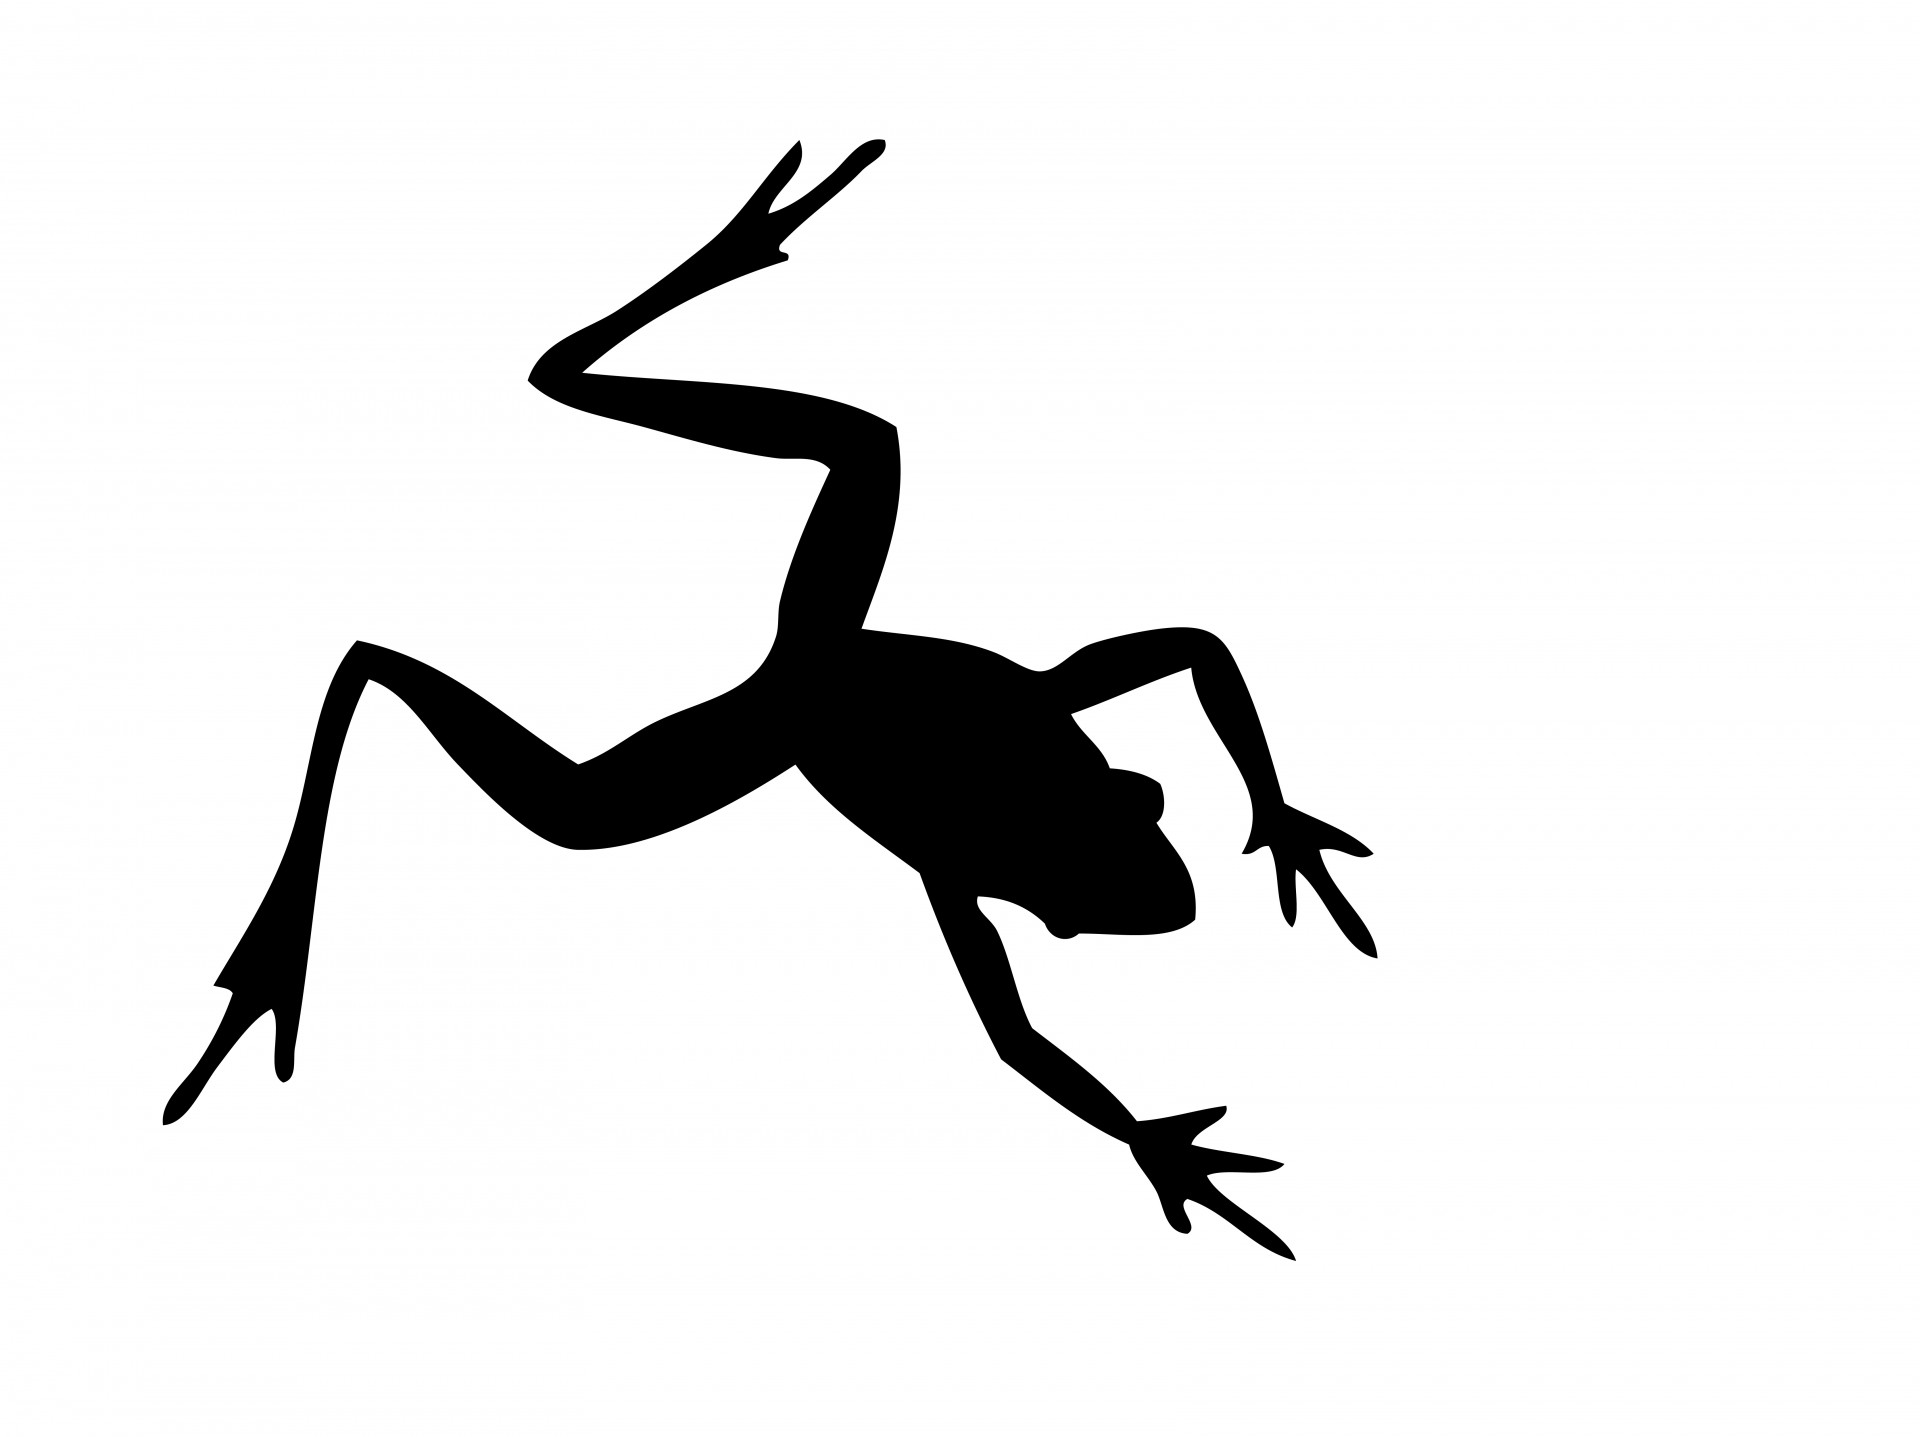 Black silhouette of a frog isolated on white background